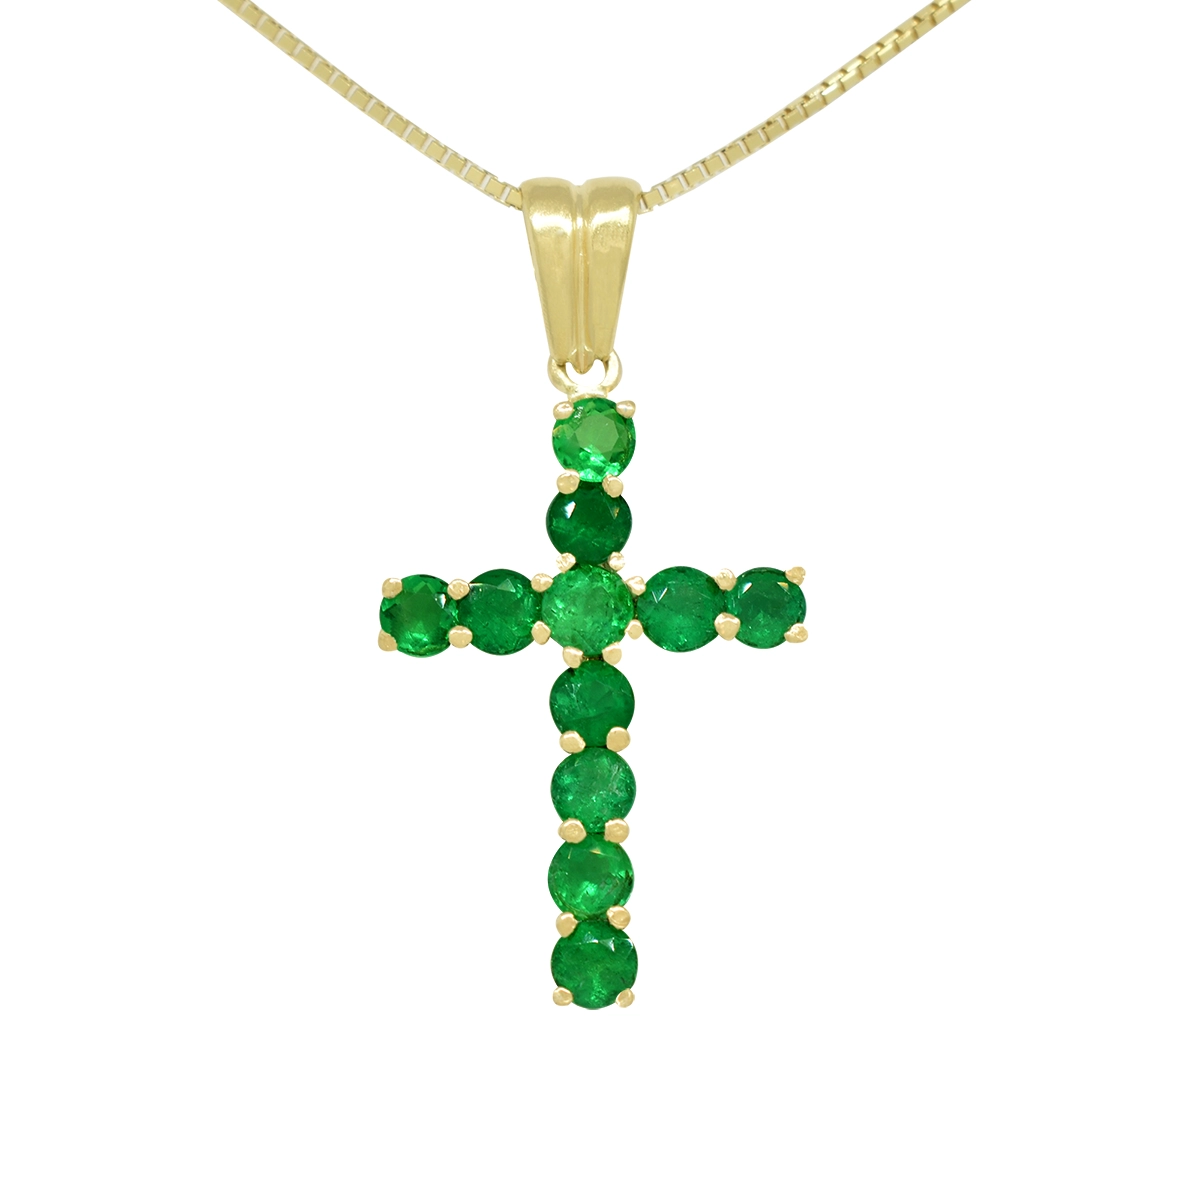 Green cross pendant necklace in 18K yellow gold with 1.55 Ct. t.w. in 11 round cut genuine natural Colombian emeralds